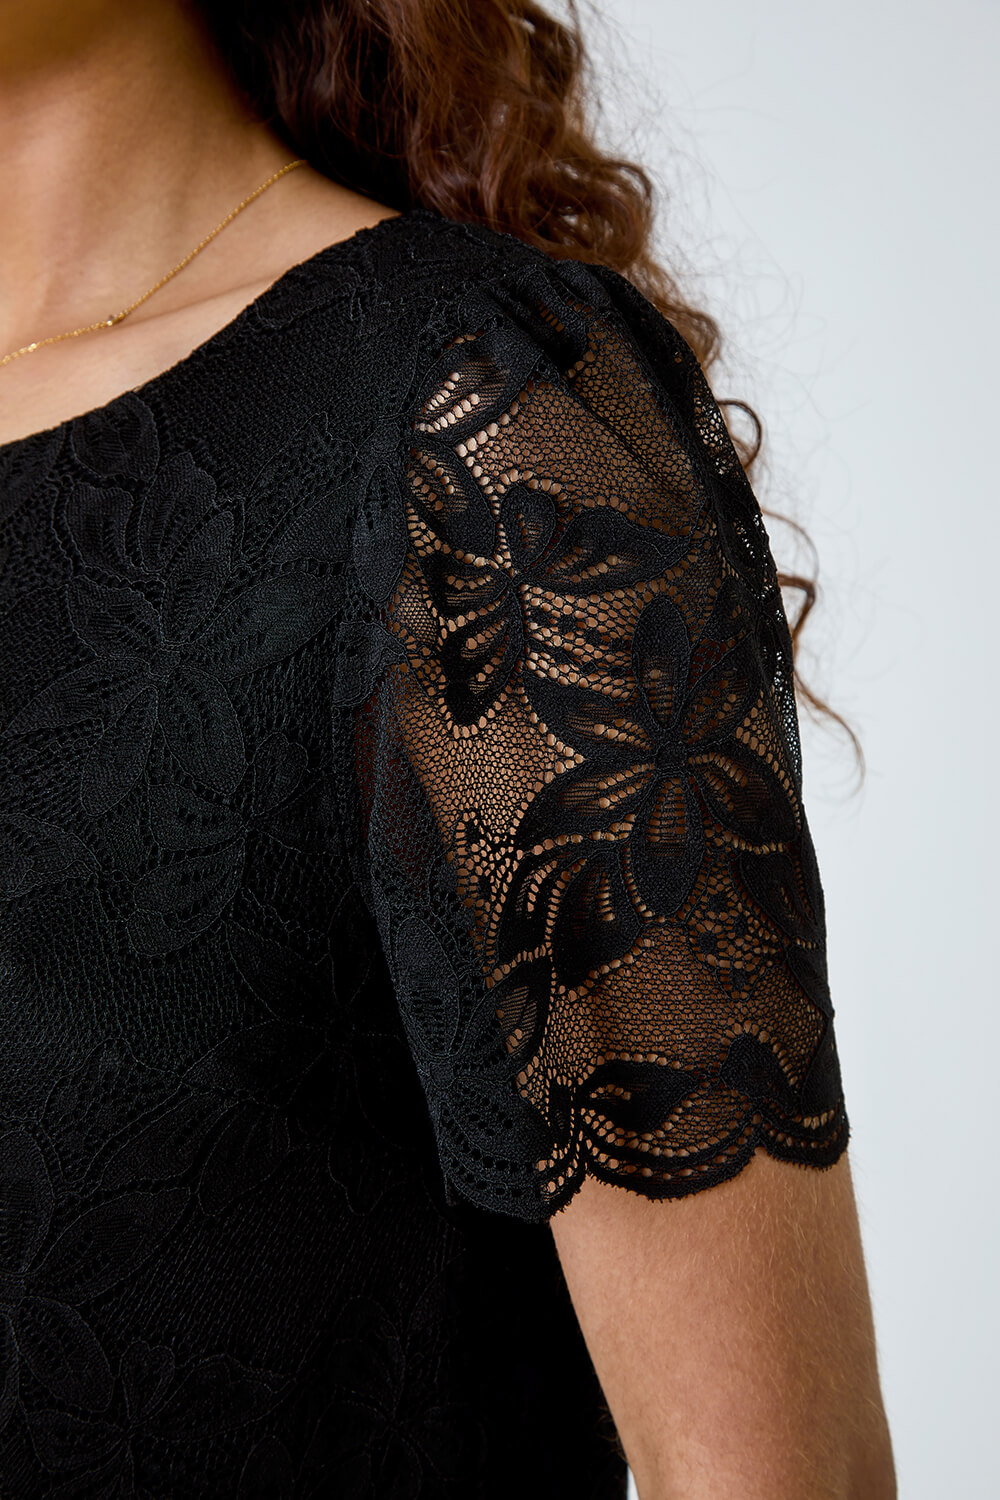 Black Floral Stretch Lace Top, Image 5 of 5